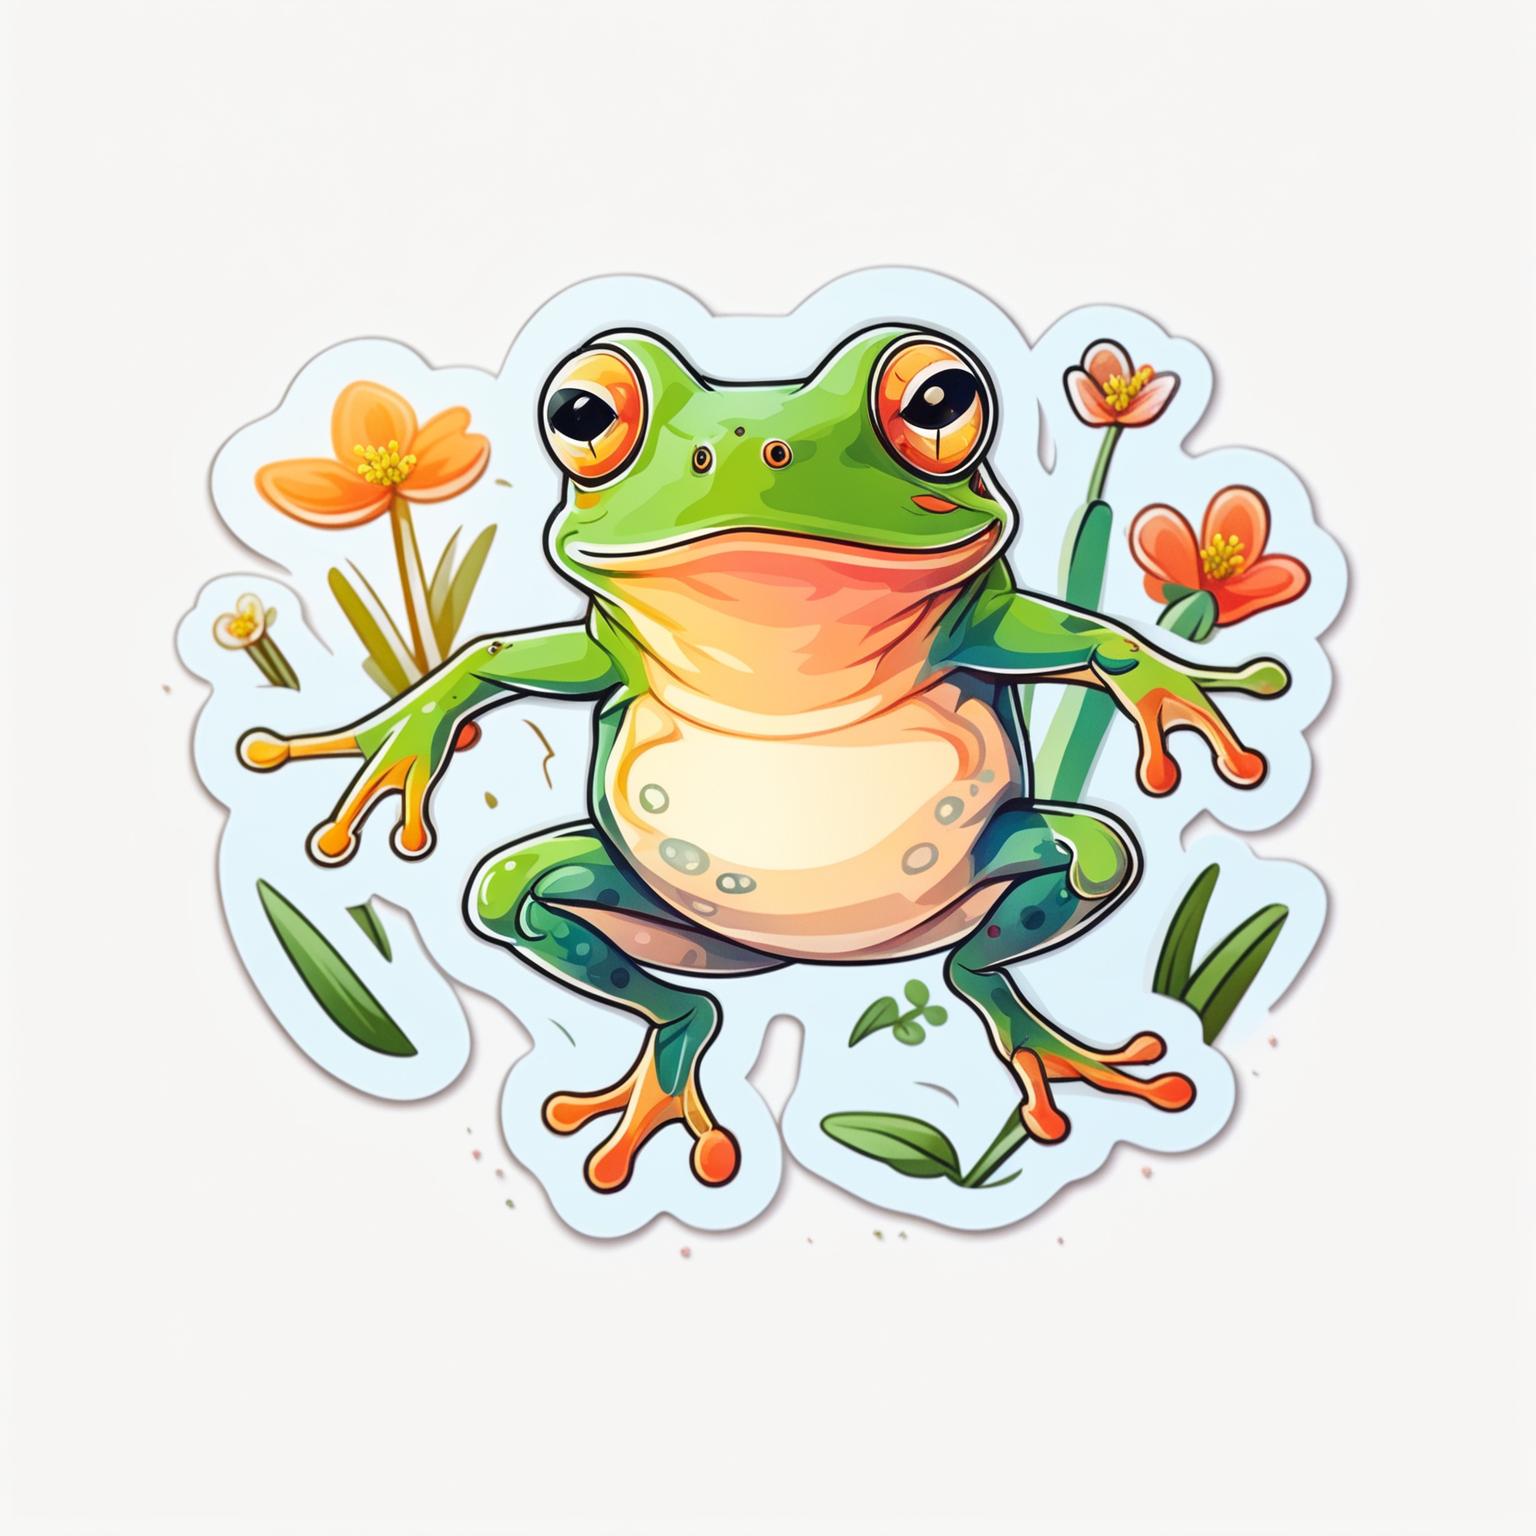 Sticker design of an adorable frog in mid-leap with a cute expression, surrounded by small flowers, grass, and leaves.